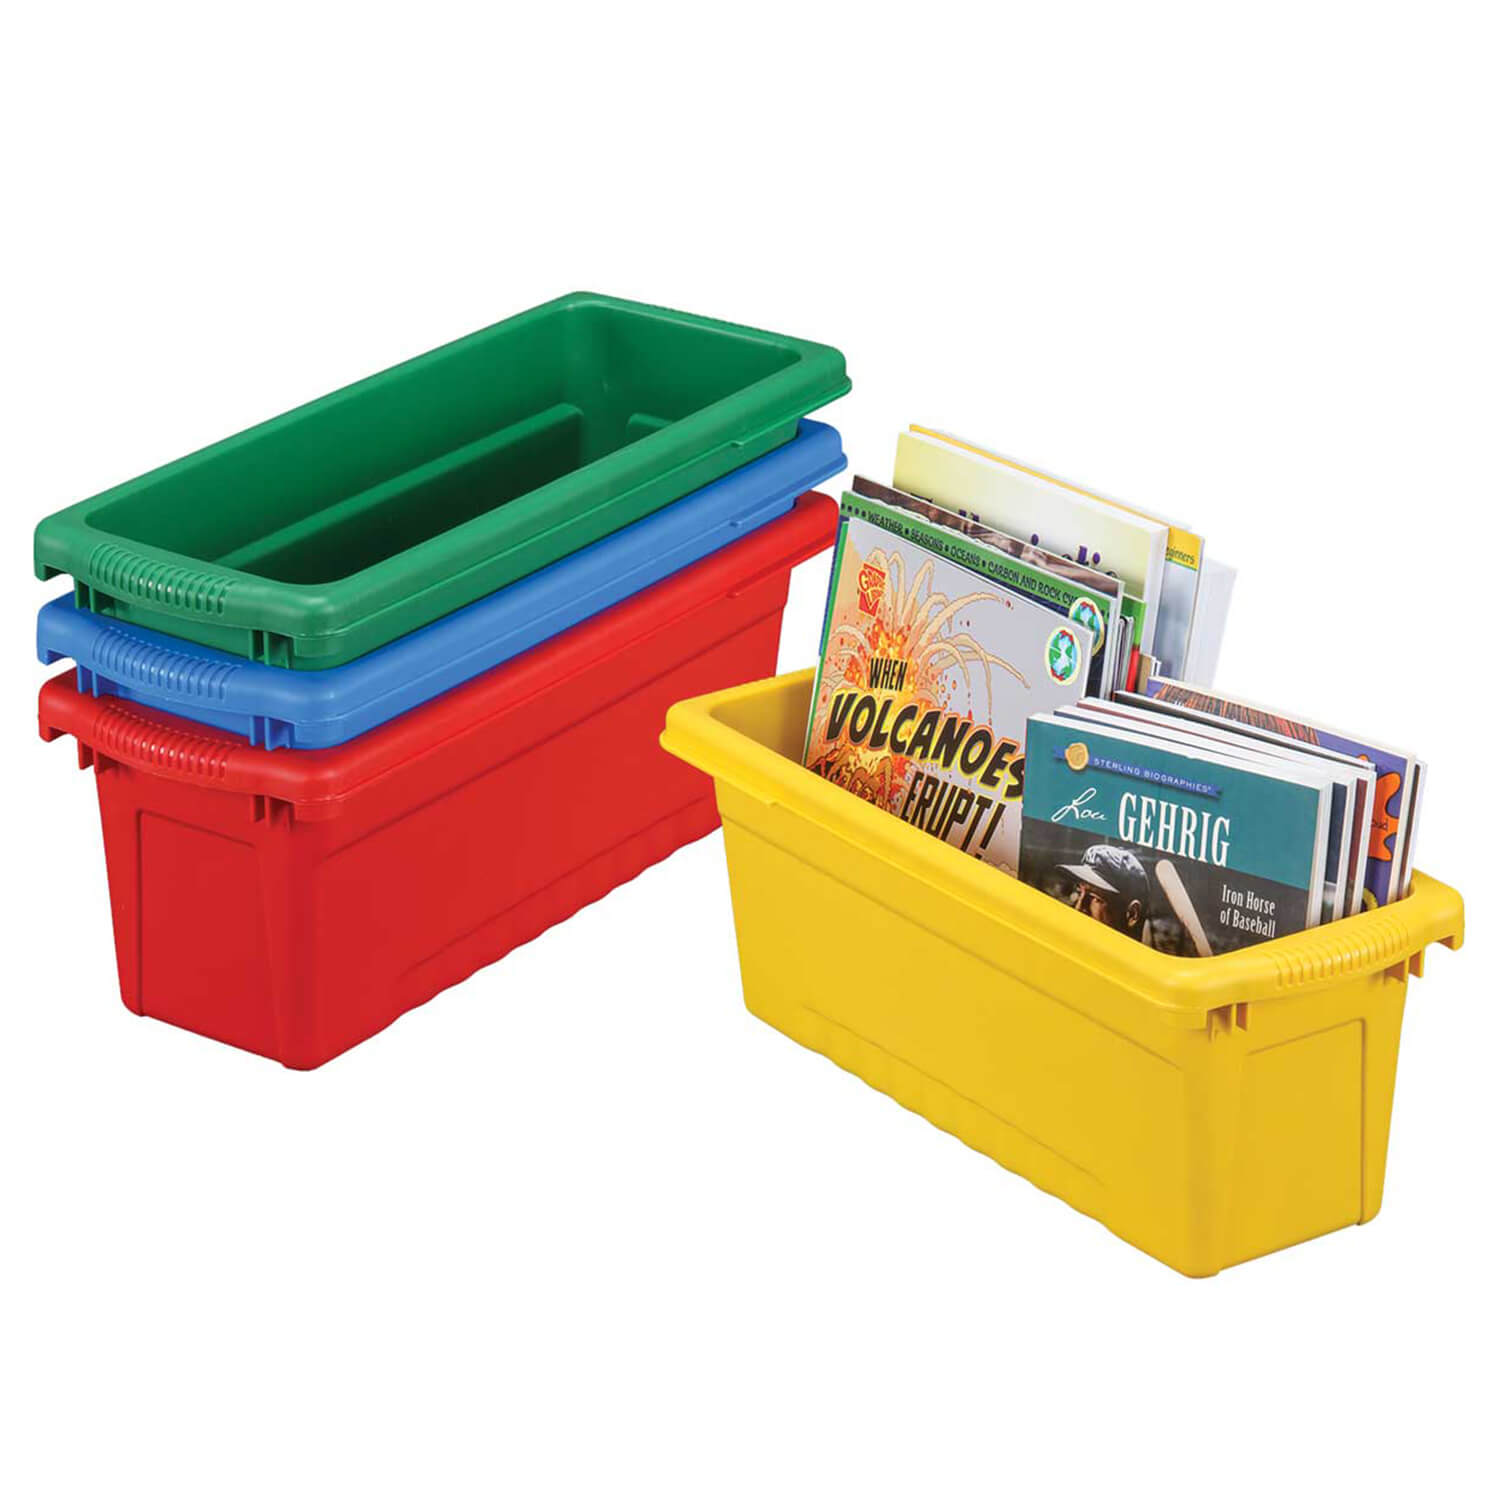 W17705810 Small Sturdy Tubs, 4 Colors - 8 tubs